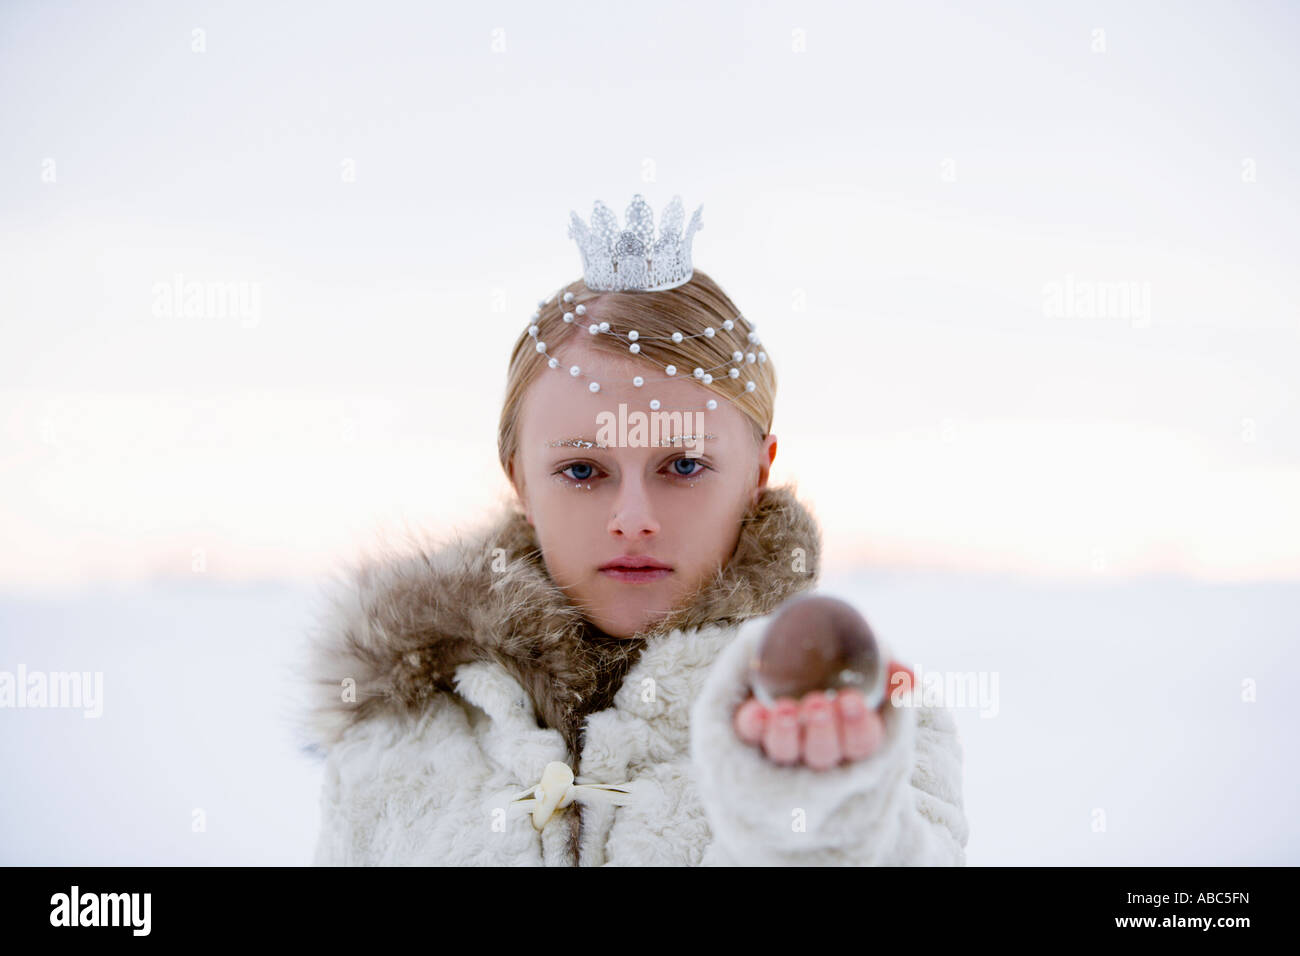 portrait of snow queen holding crystal ball Stock Photo